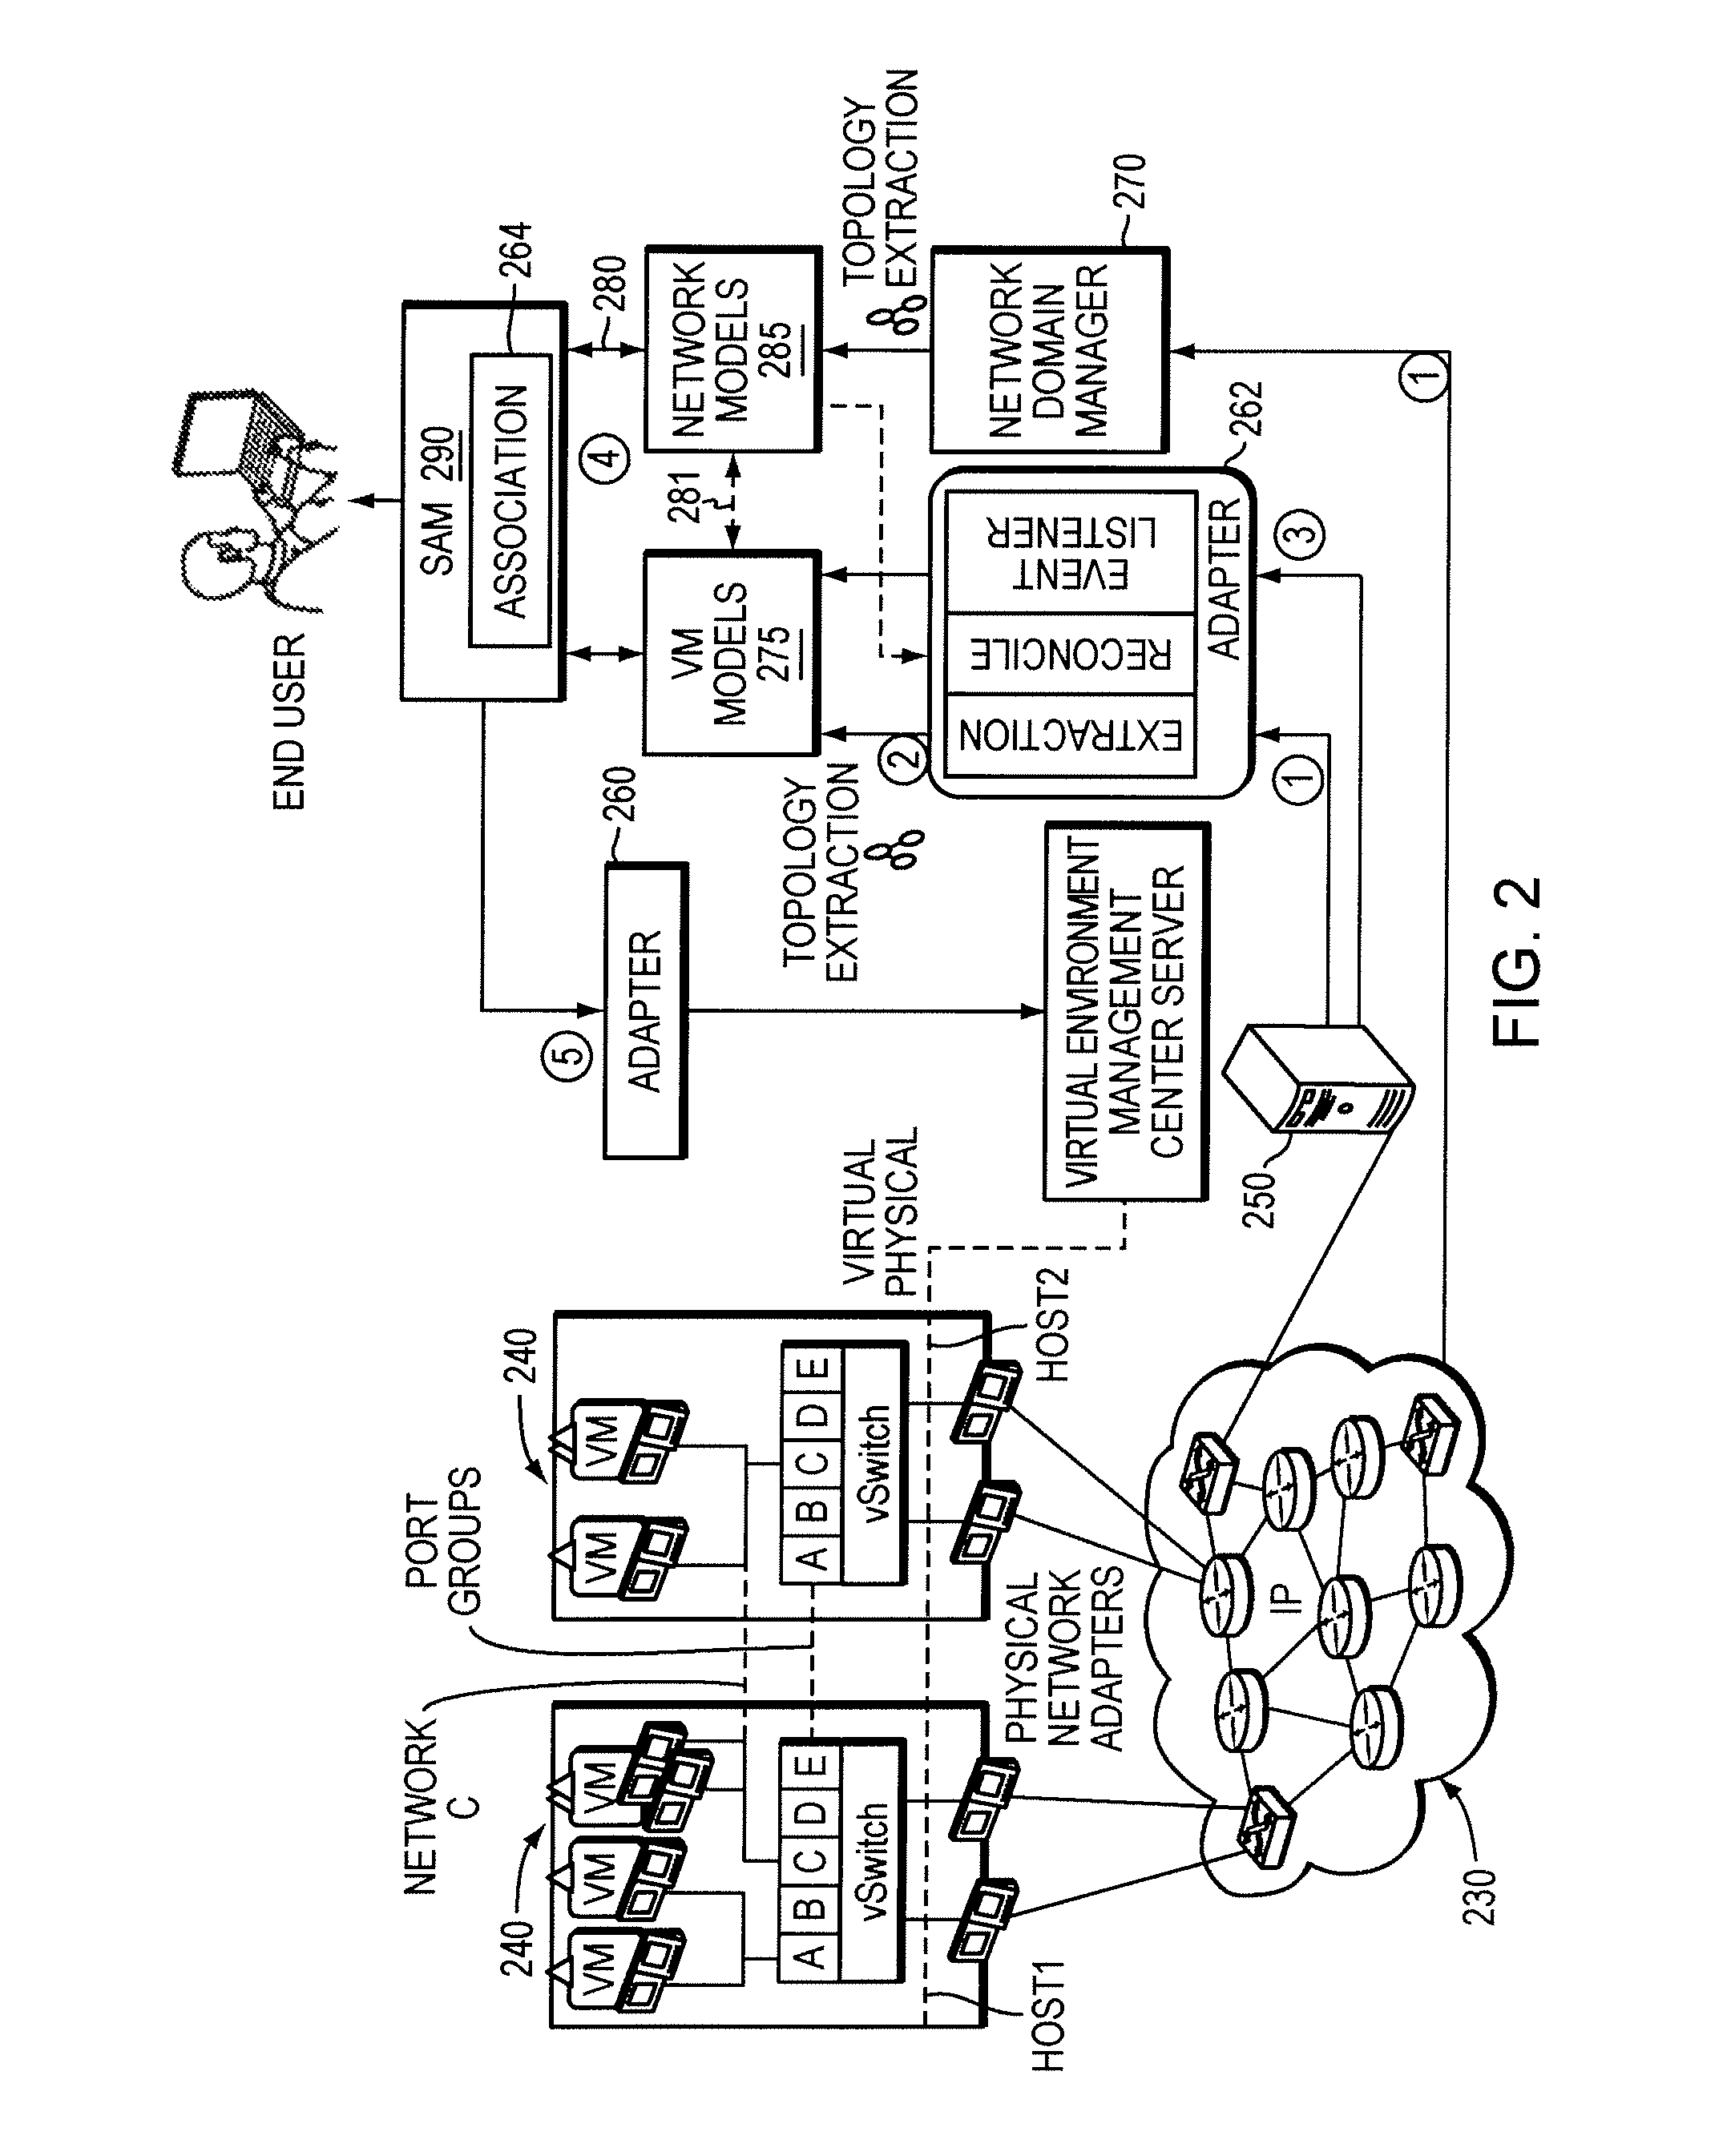 System and method for managing a virtual domain environment to enable root cause and impact analysis